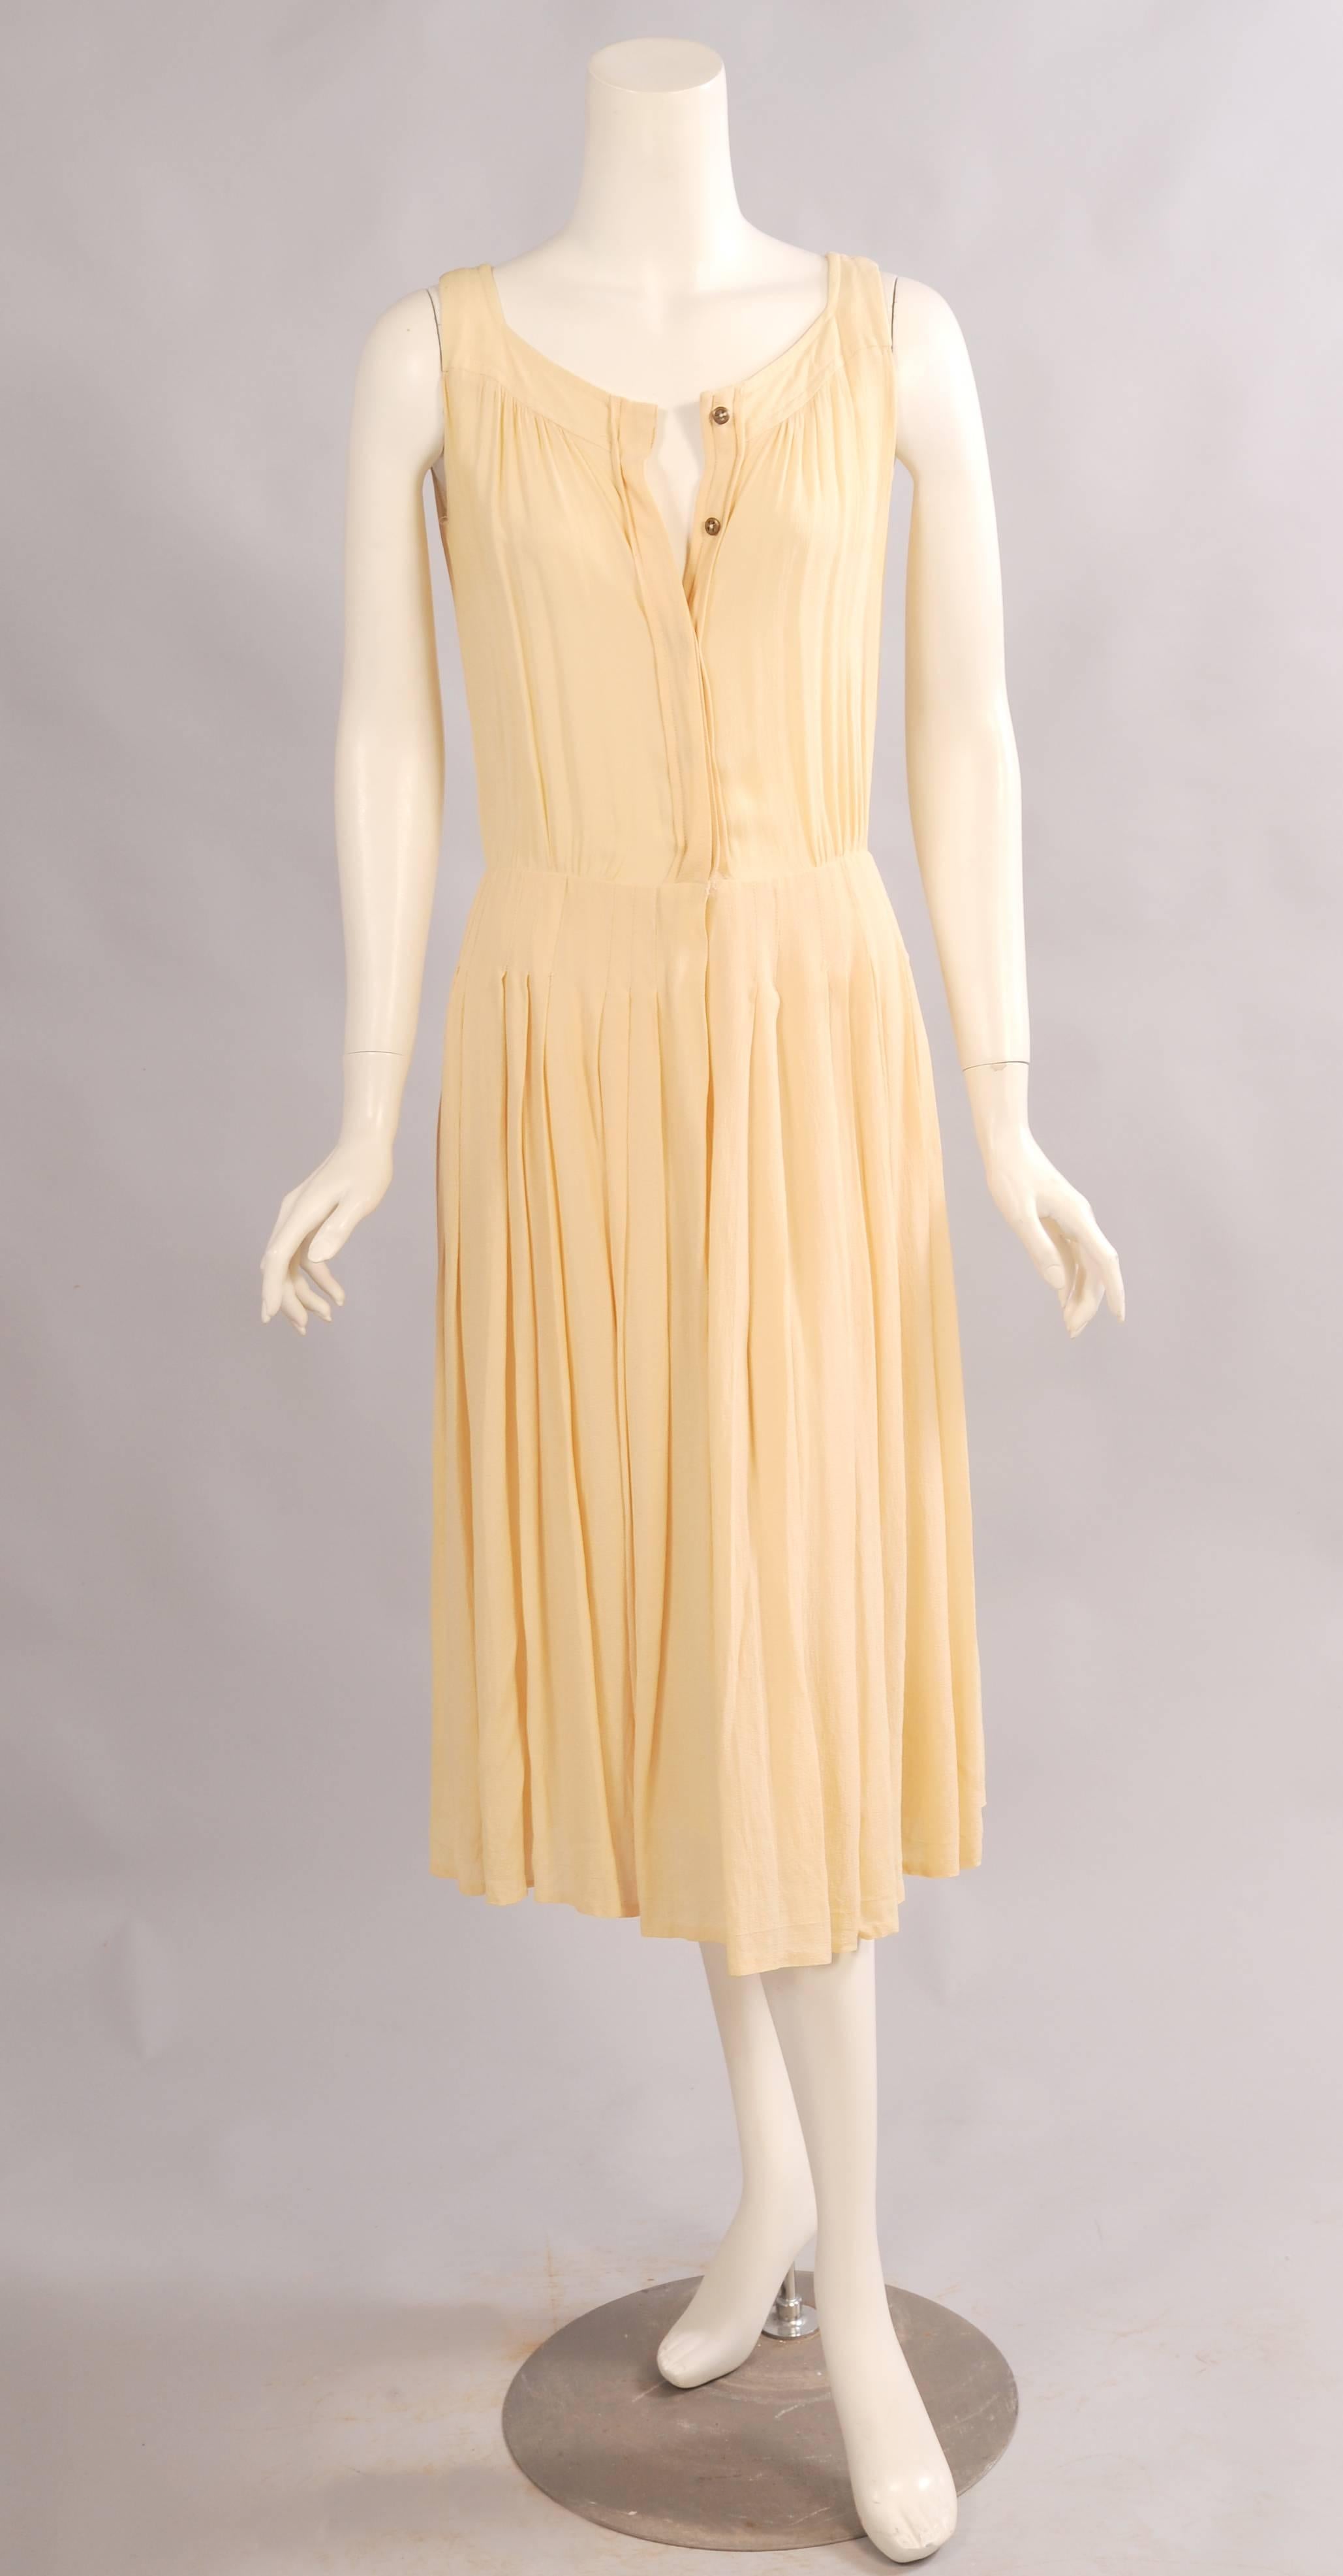 A perfect little summer dress this butter yellow silk crepe dress has front and back yokes over a gently gathered bodice. The dress buttons at the center front with concealed meatl buttons. The silk lined skirt has stitched down pleats over the hips